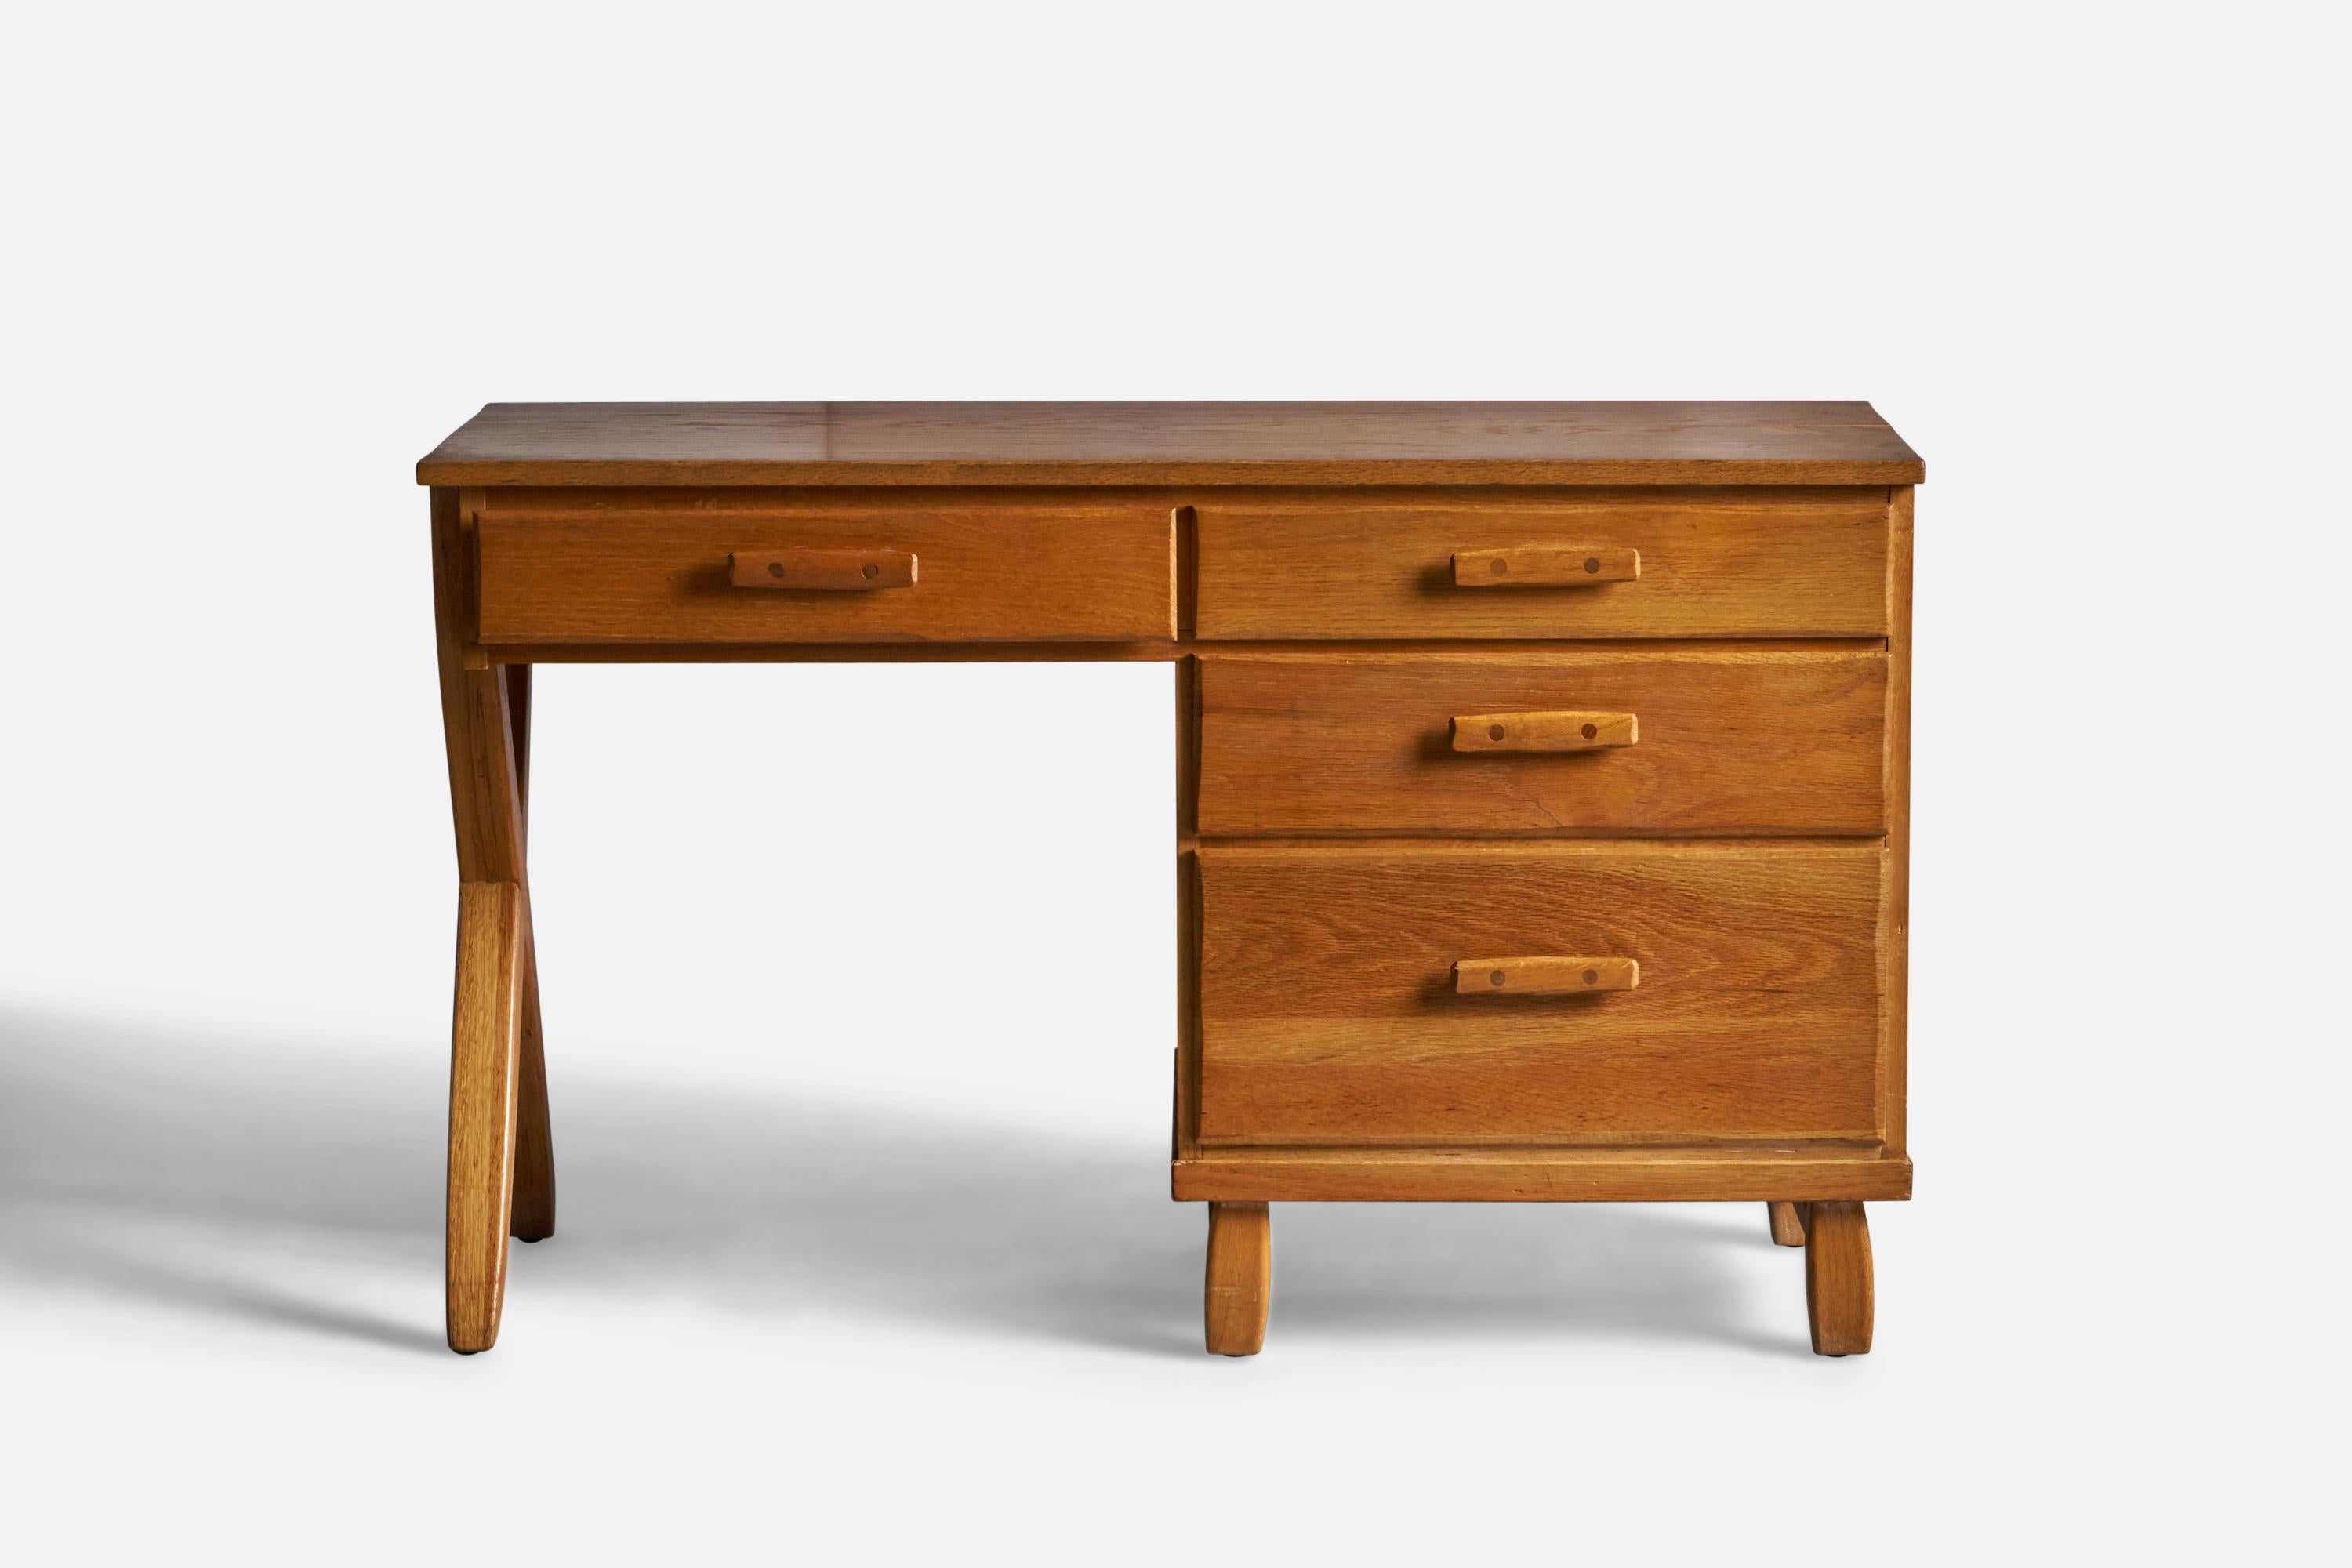 A small solid oak writing desk from the 